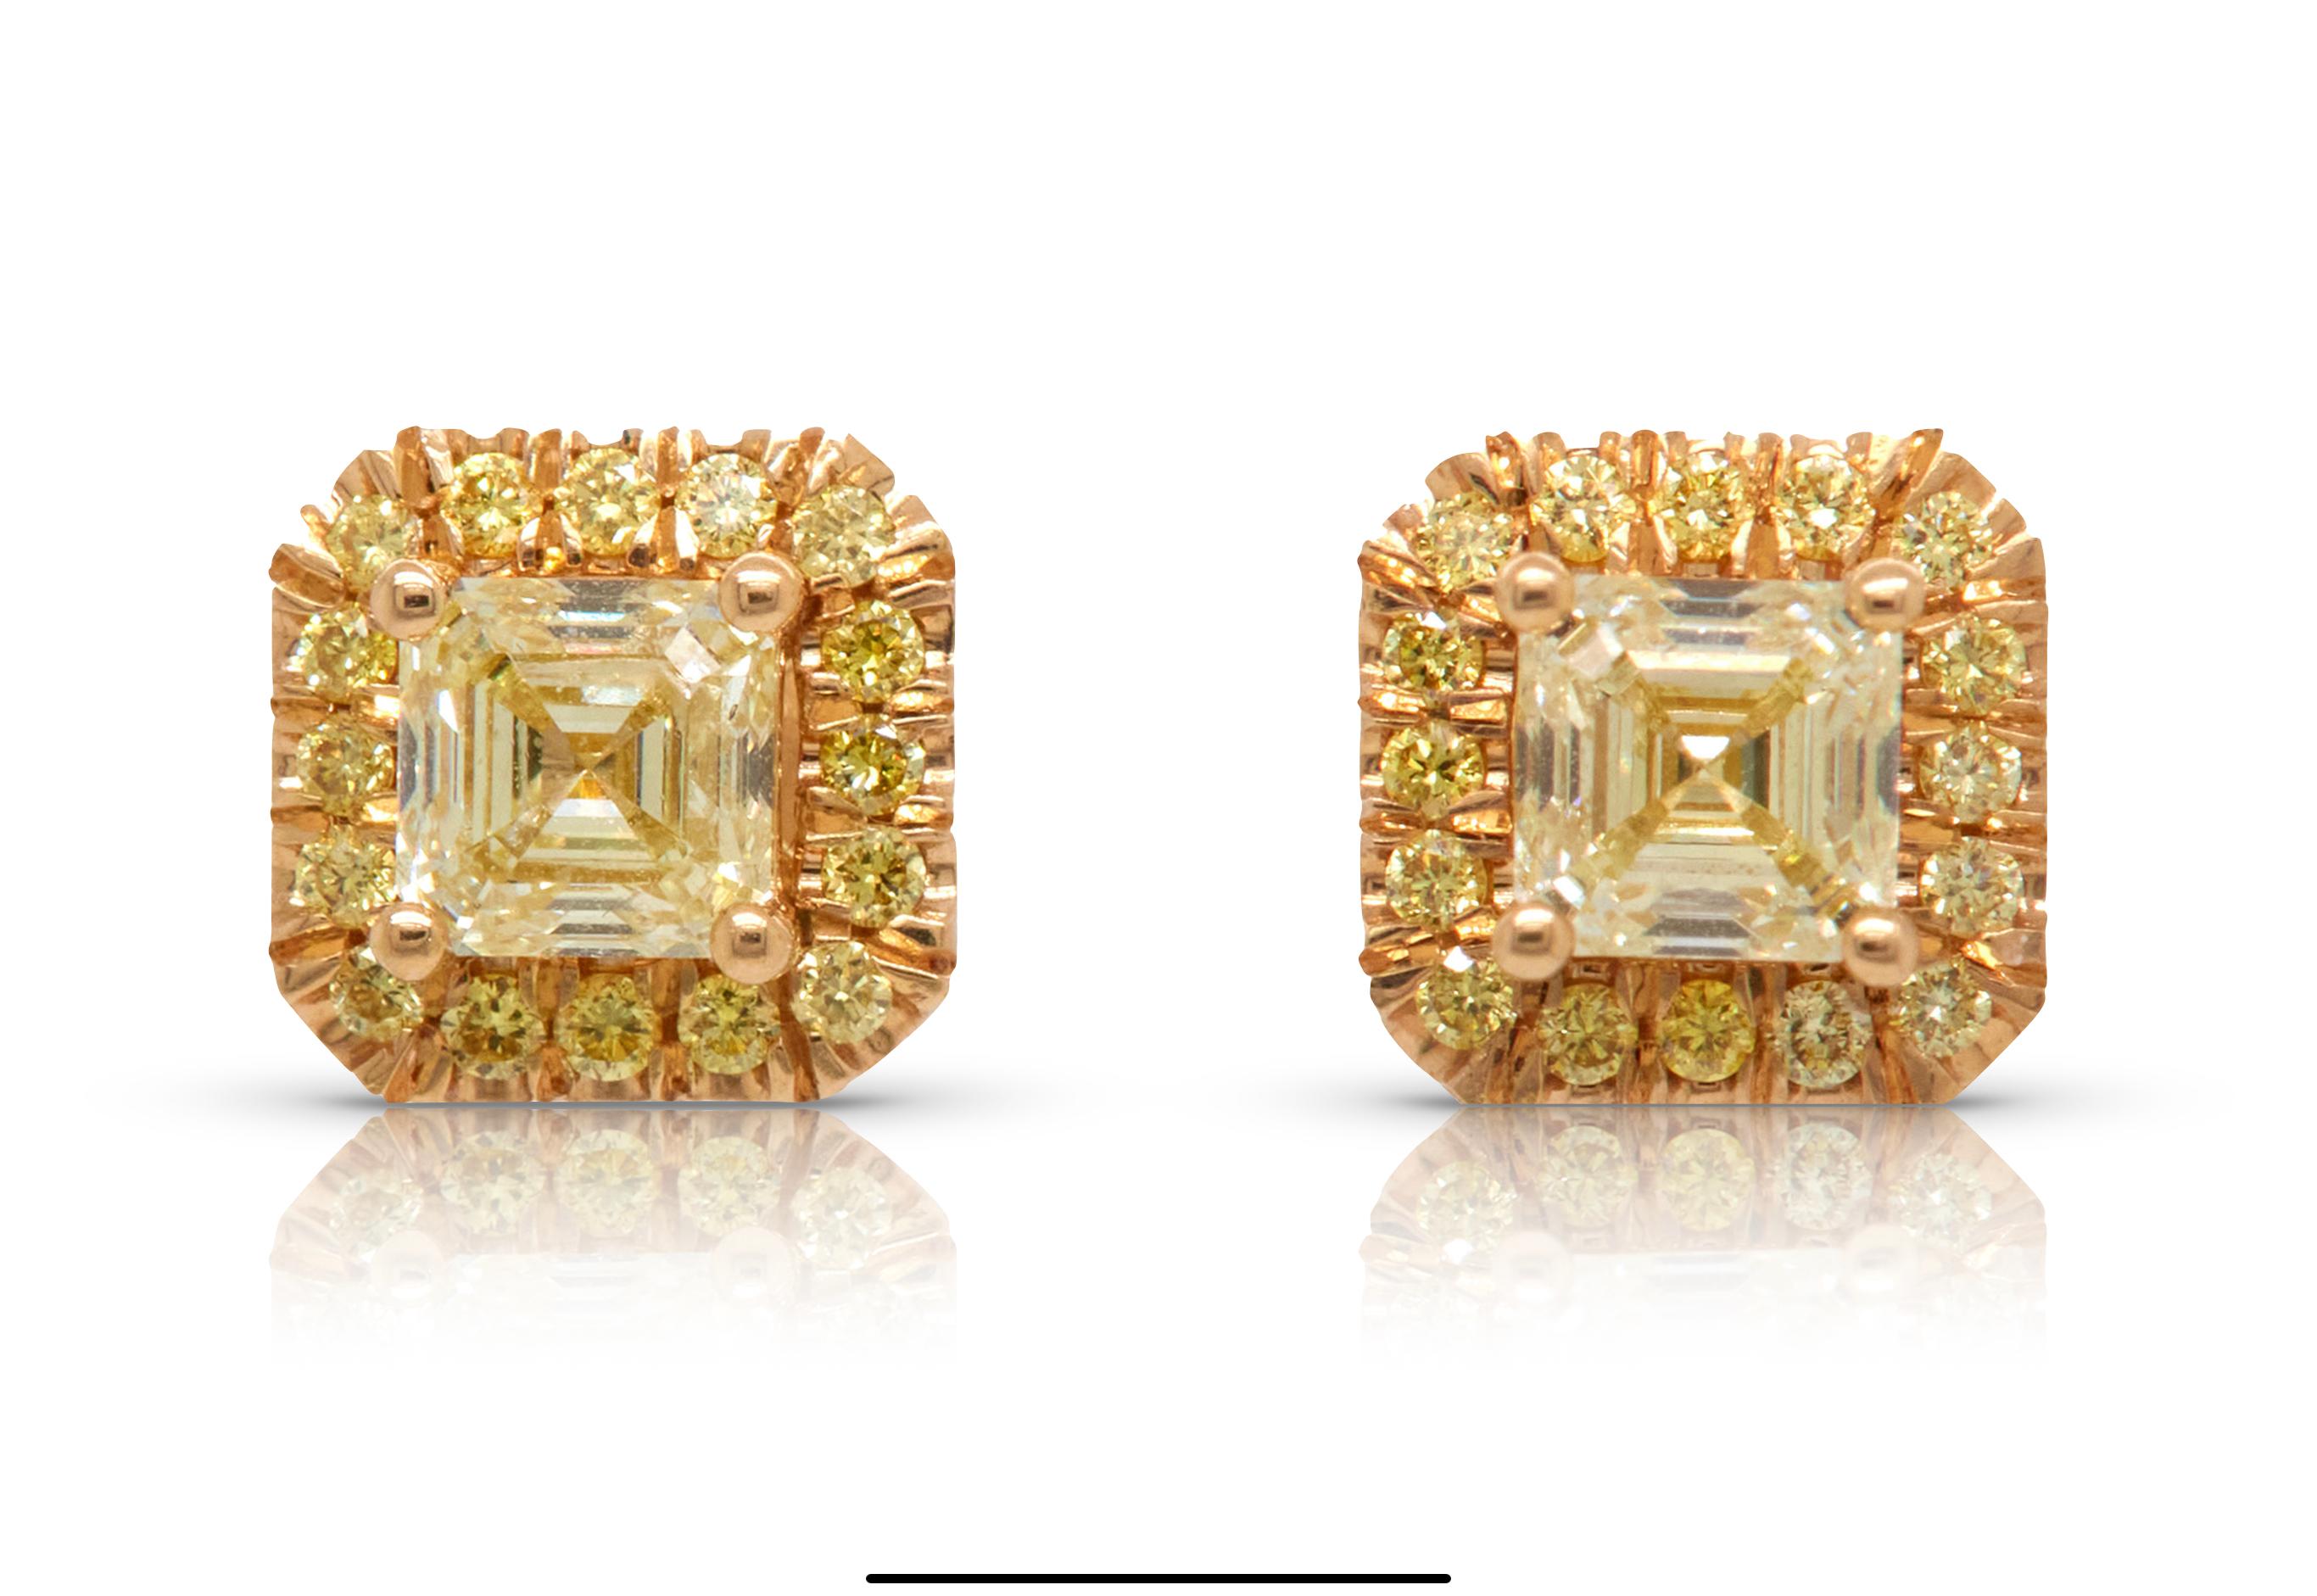 1.45 carat Fancy Intense Yellow Diamond Stud Earrings. These beautiful earrings feature a pair of perfectly matched Asscher cut, 1.21 carat fancy yellow diamonds in a glamorous fancy yellow diamond halo.
Set in a polished 18K Yellow Gold. these